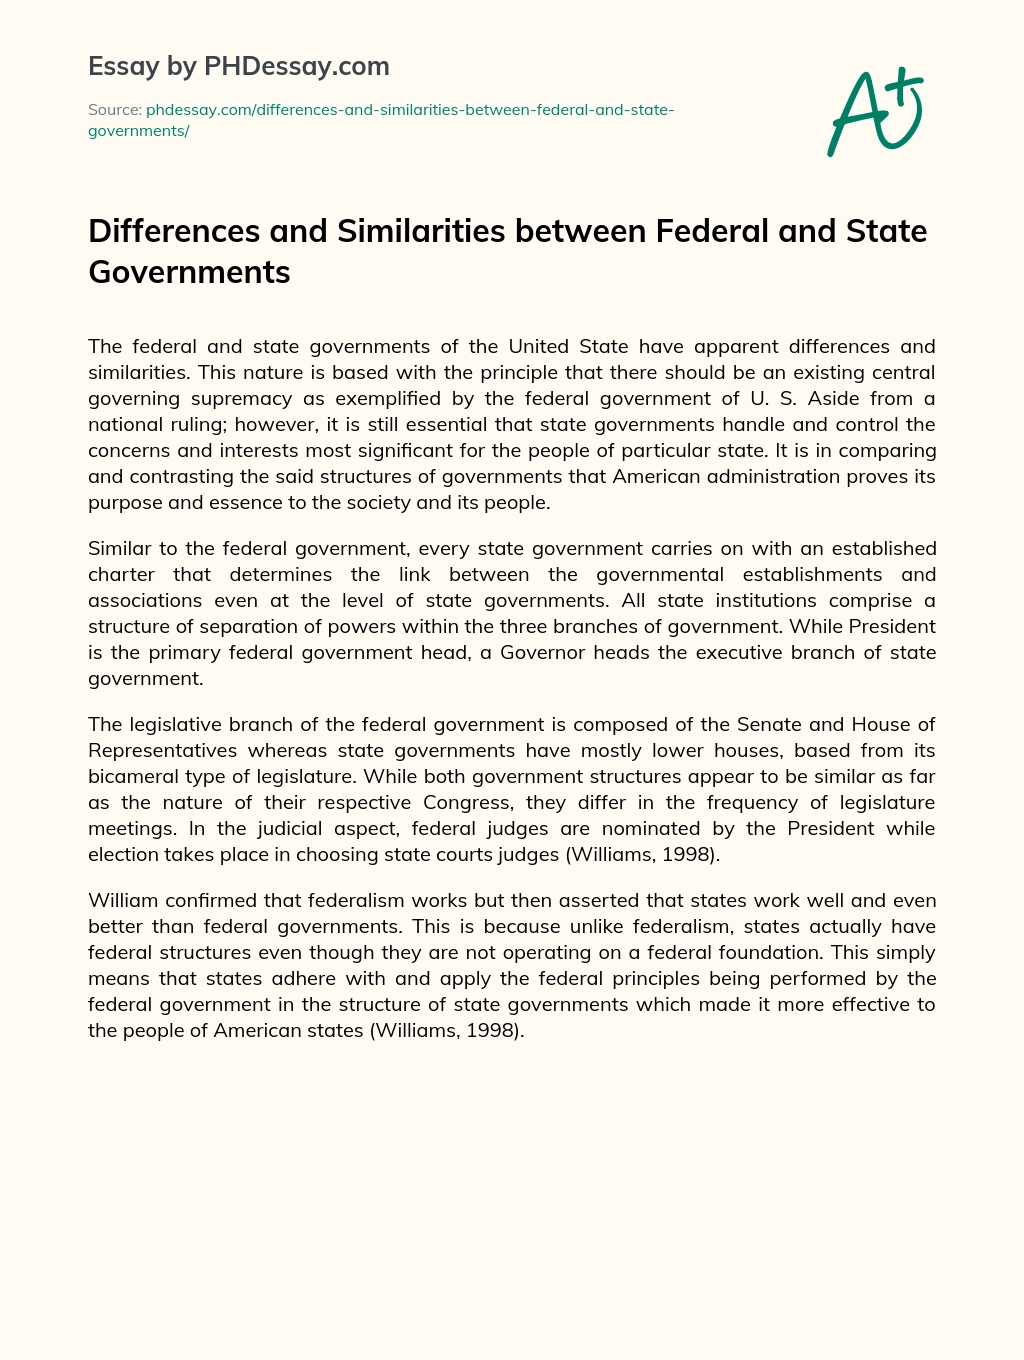 Differences and Similarities between Federal and State Governments essay